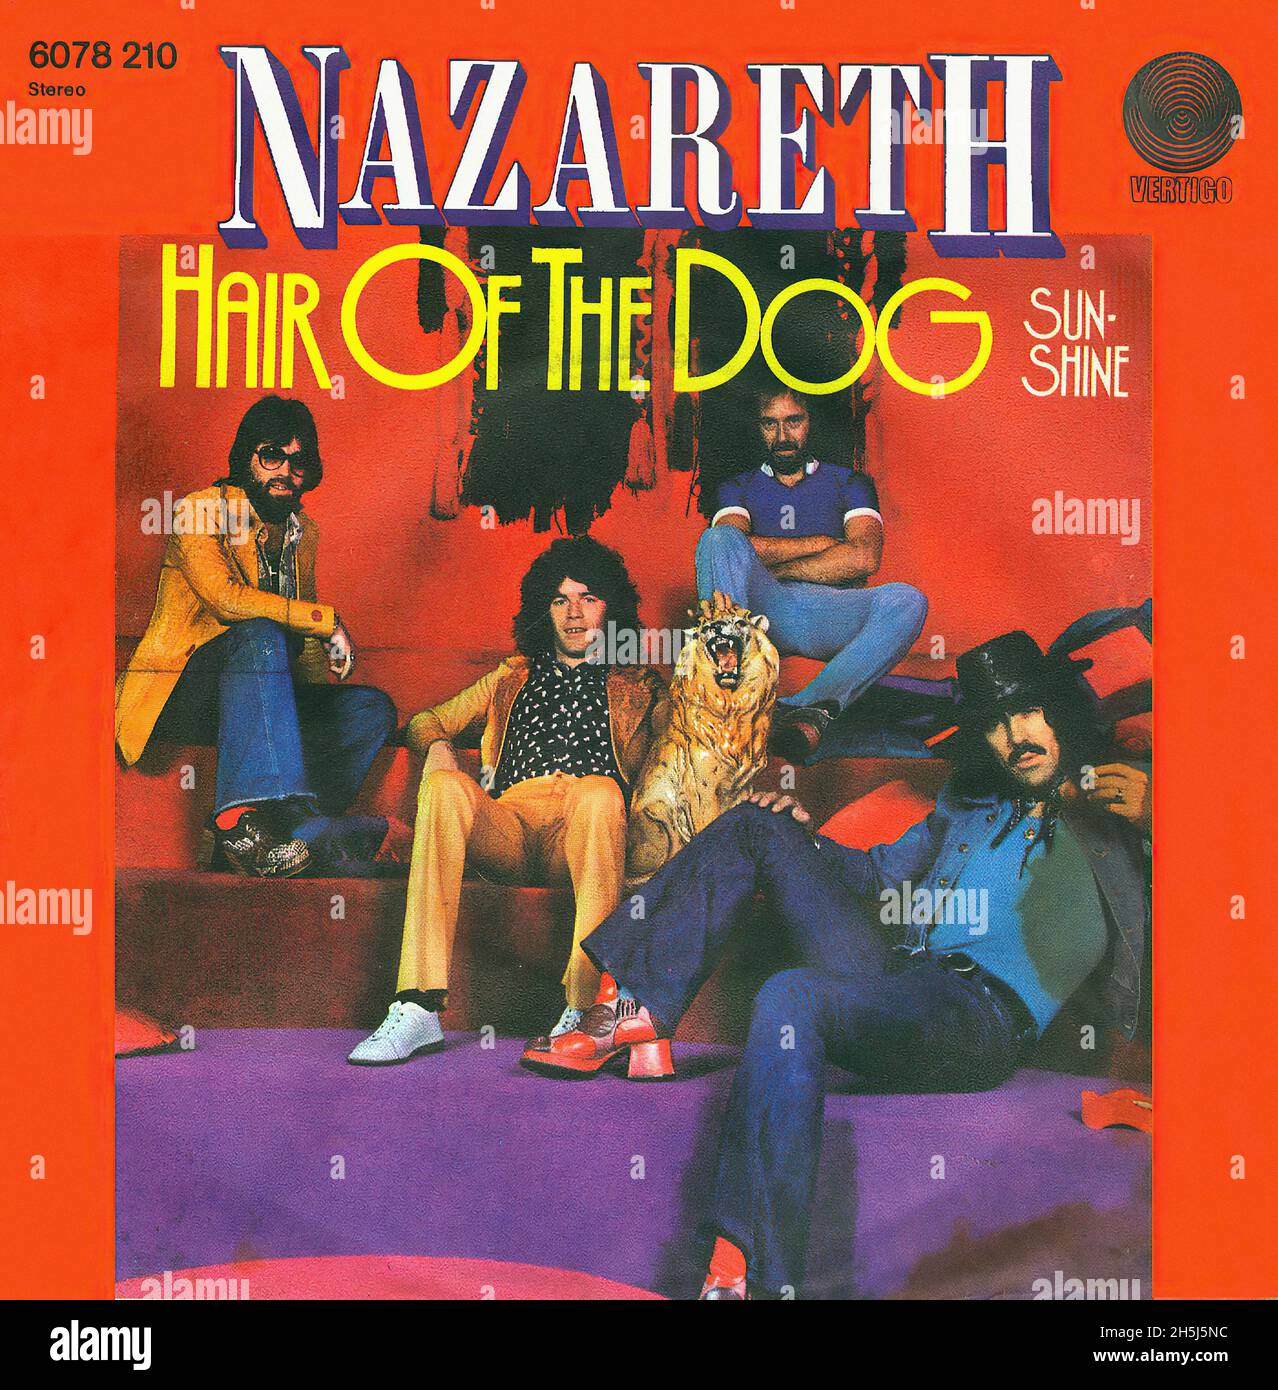 Vintage single record cover - Nazareth - Hair Of The Dog - D - 1975 Stock  Photo - Alamy